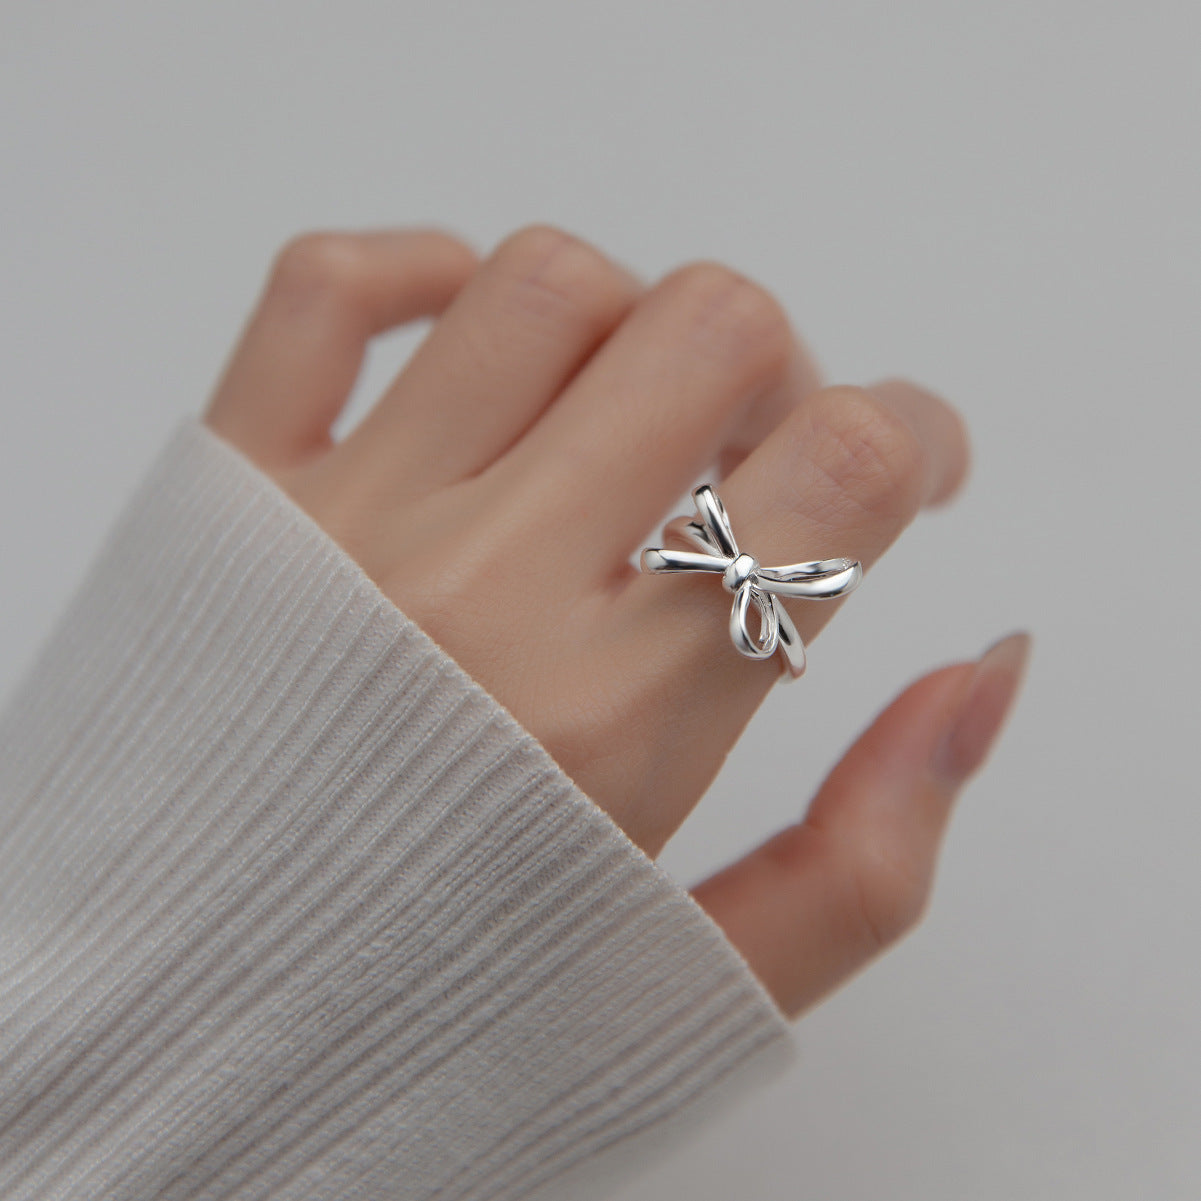 S925 Silver Bow Ring Simple Line Women's Jewelry